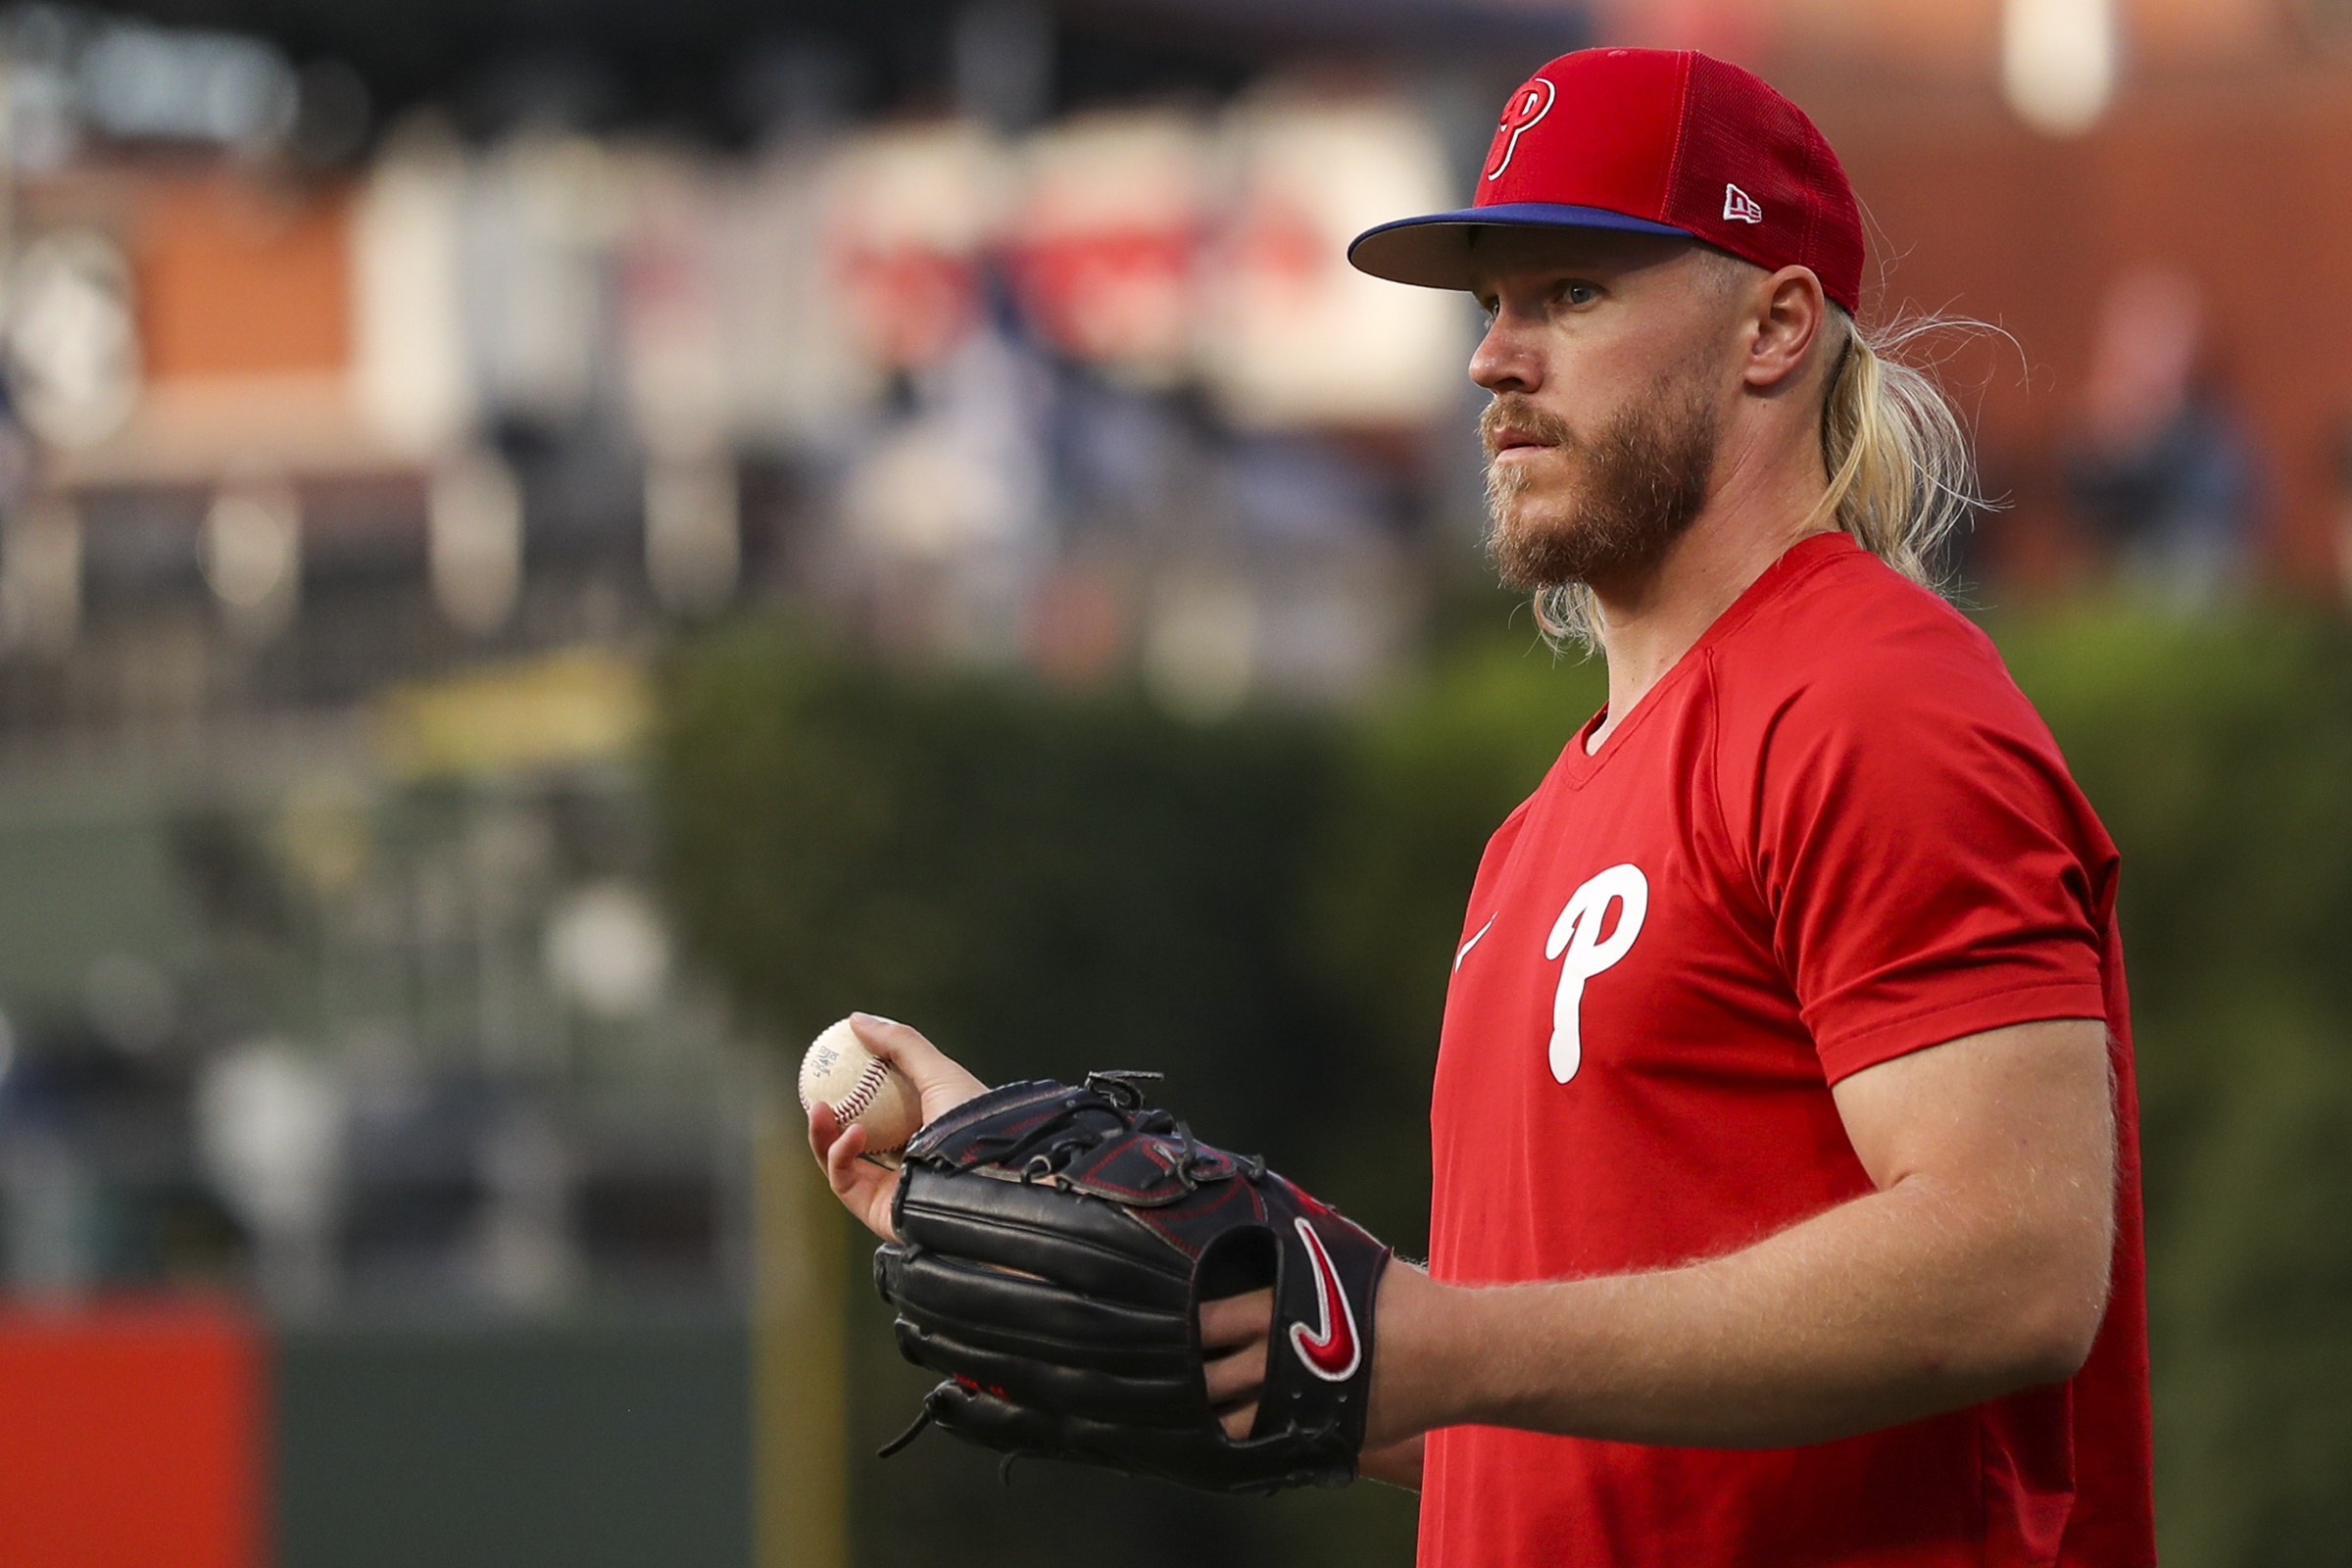 Phillies' Noah Syndergaard didn't get to catch Chase Utley's first